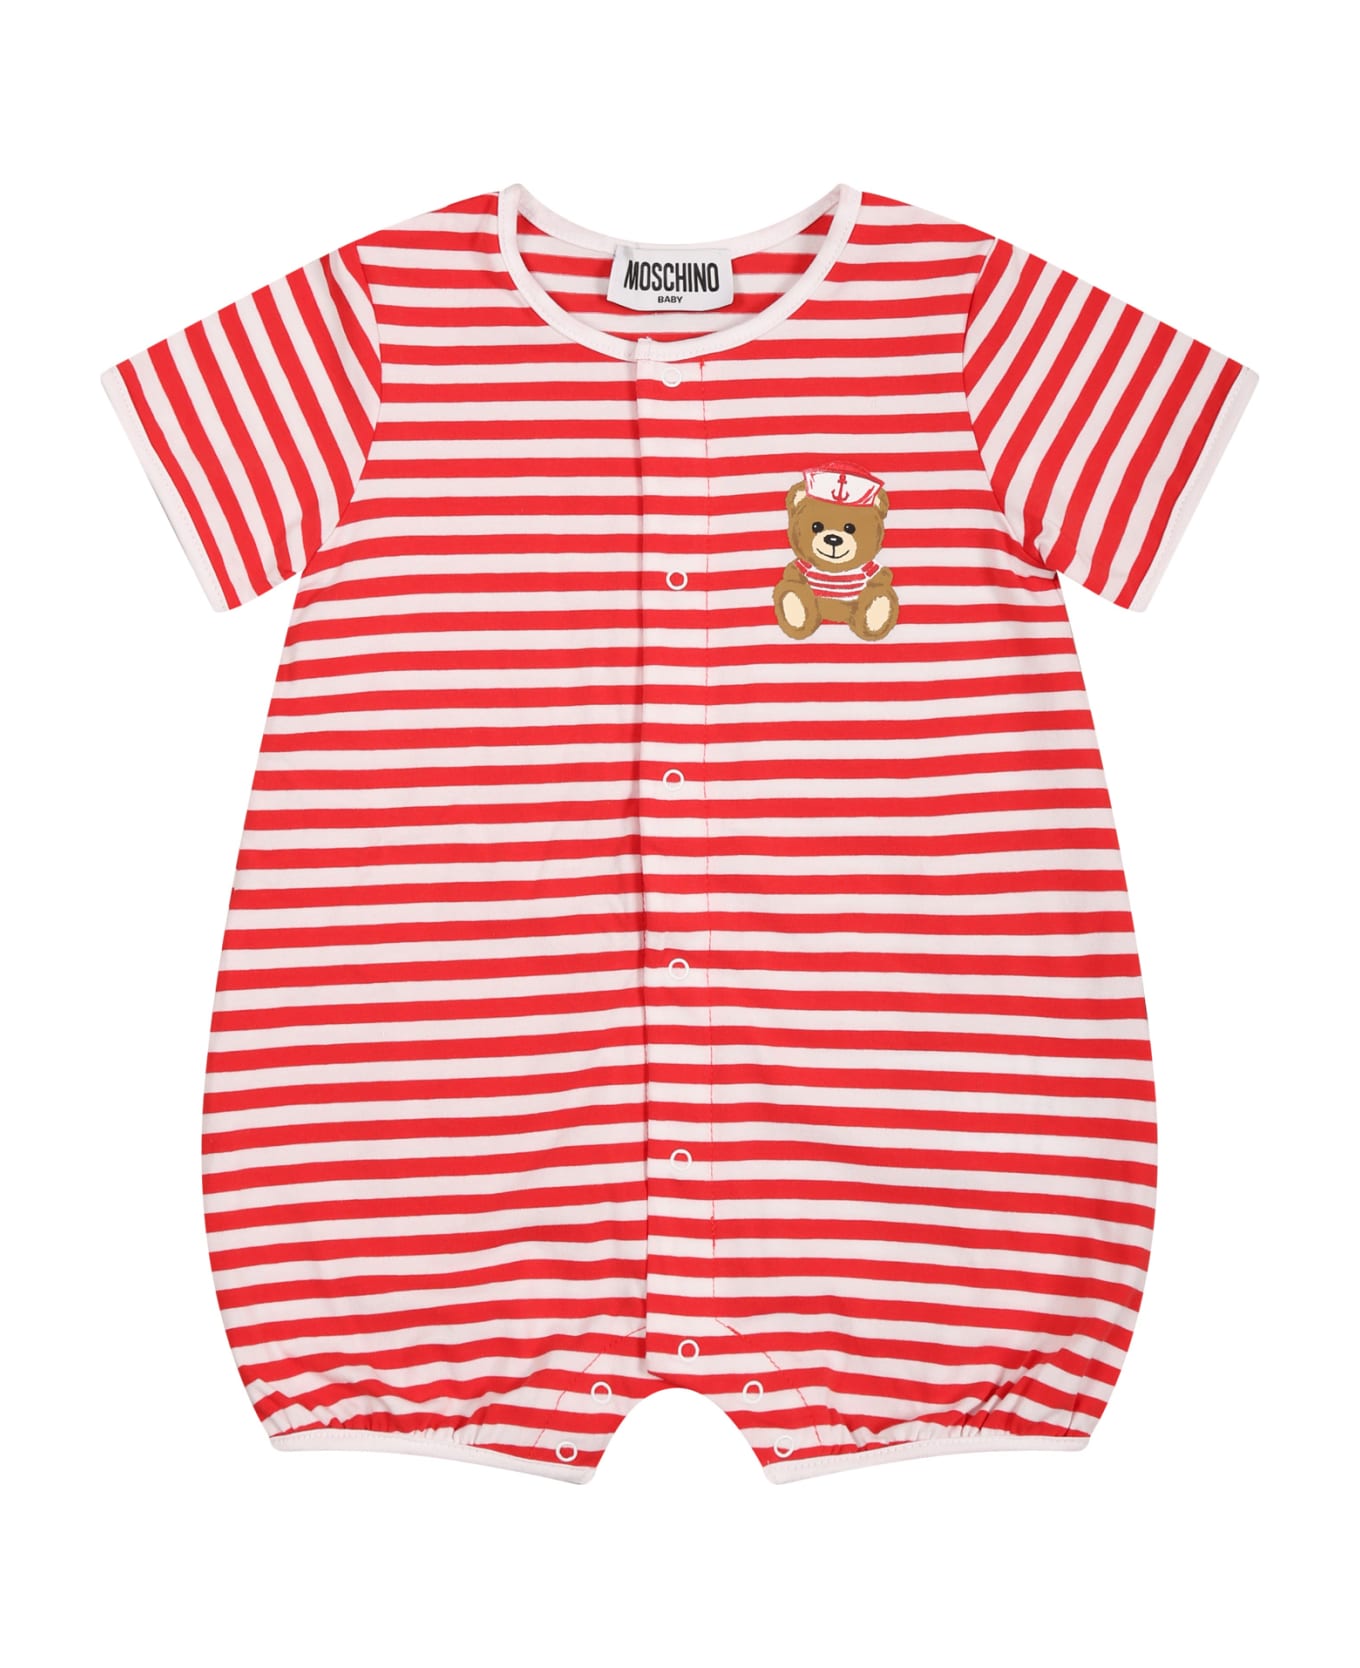 Moschino Multicolor Romper For Baby Boy With Teddy Bear And Logo - Red